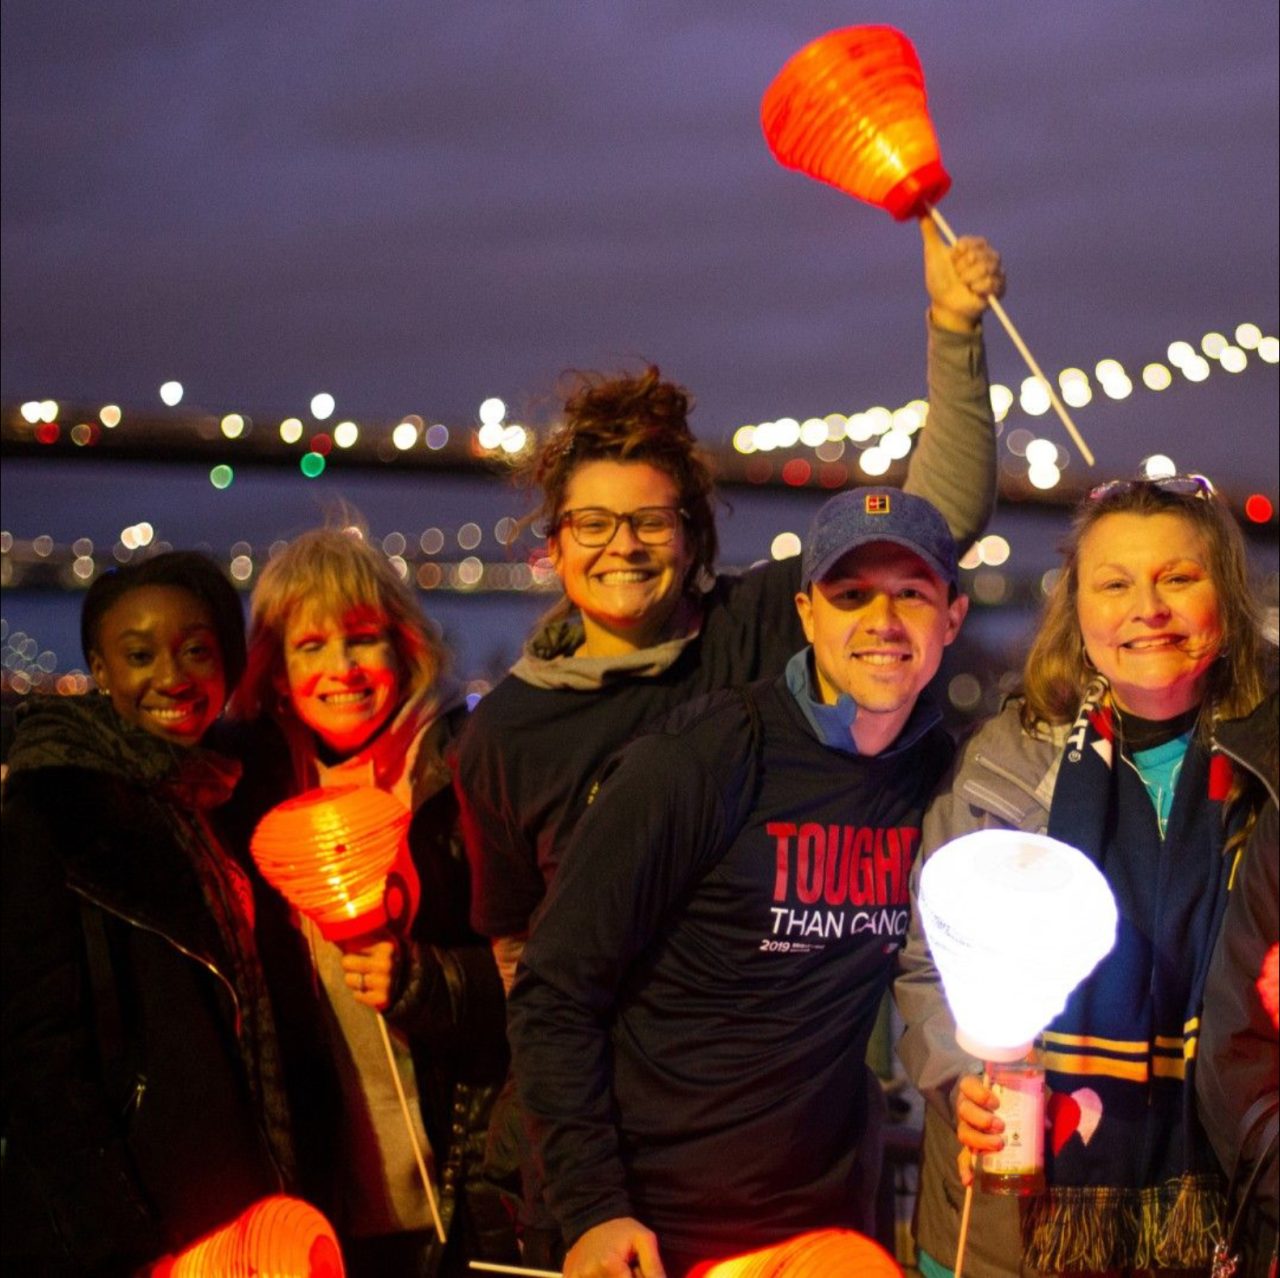 We’re getting ready to bring light to the darkness of cancer this fall with over 100 Light The Night events happening across the United States! – The Leukemia and Lymphoma Society